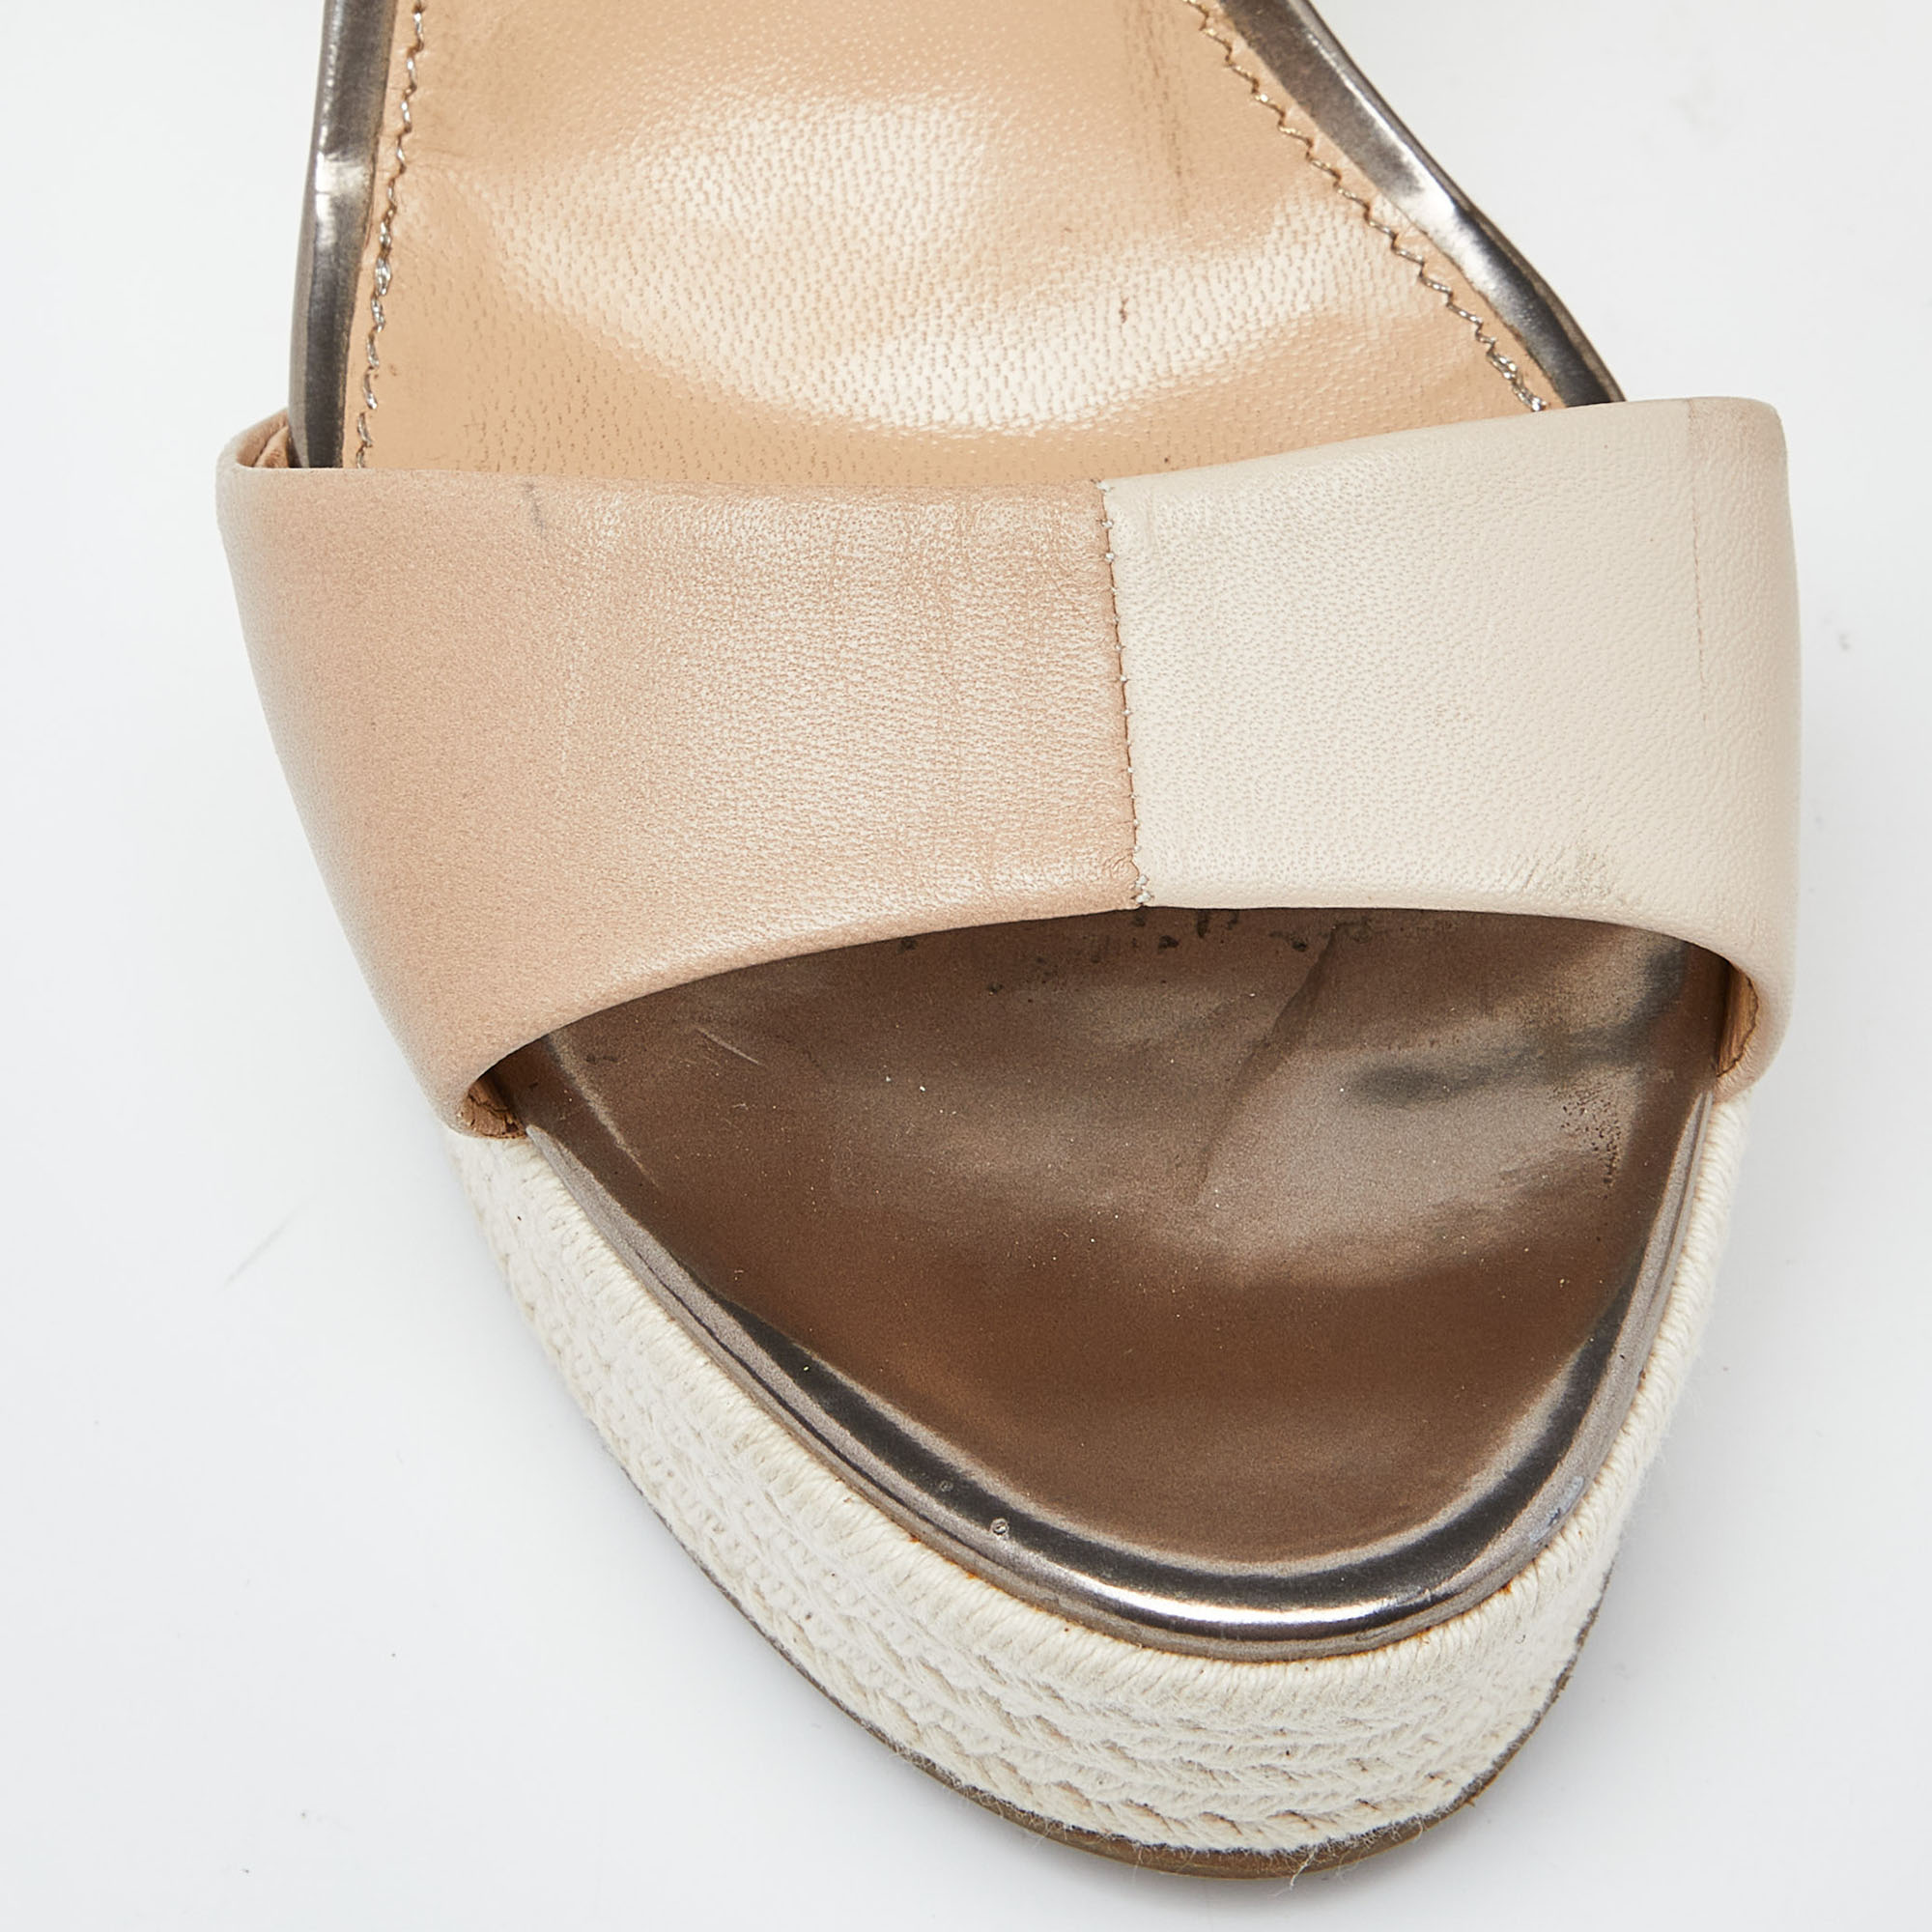 Sergio Rossi Beige Leather Espadrille Wedge Ankle Strap Sandals 39